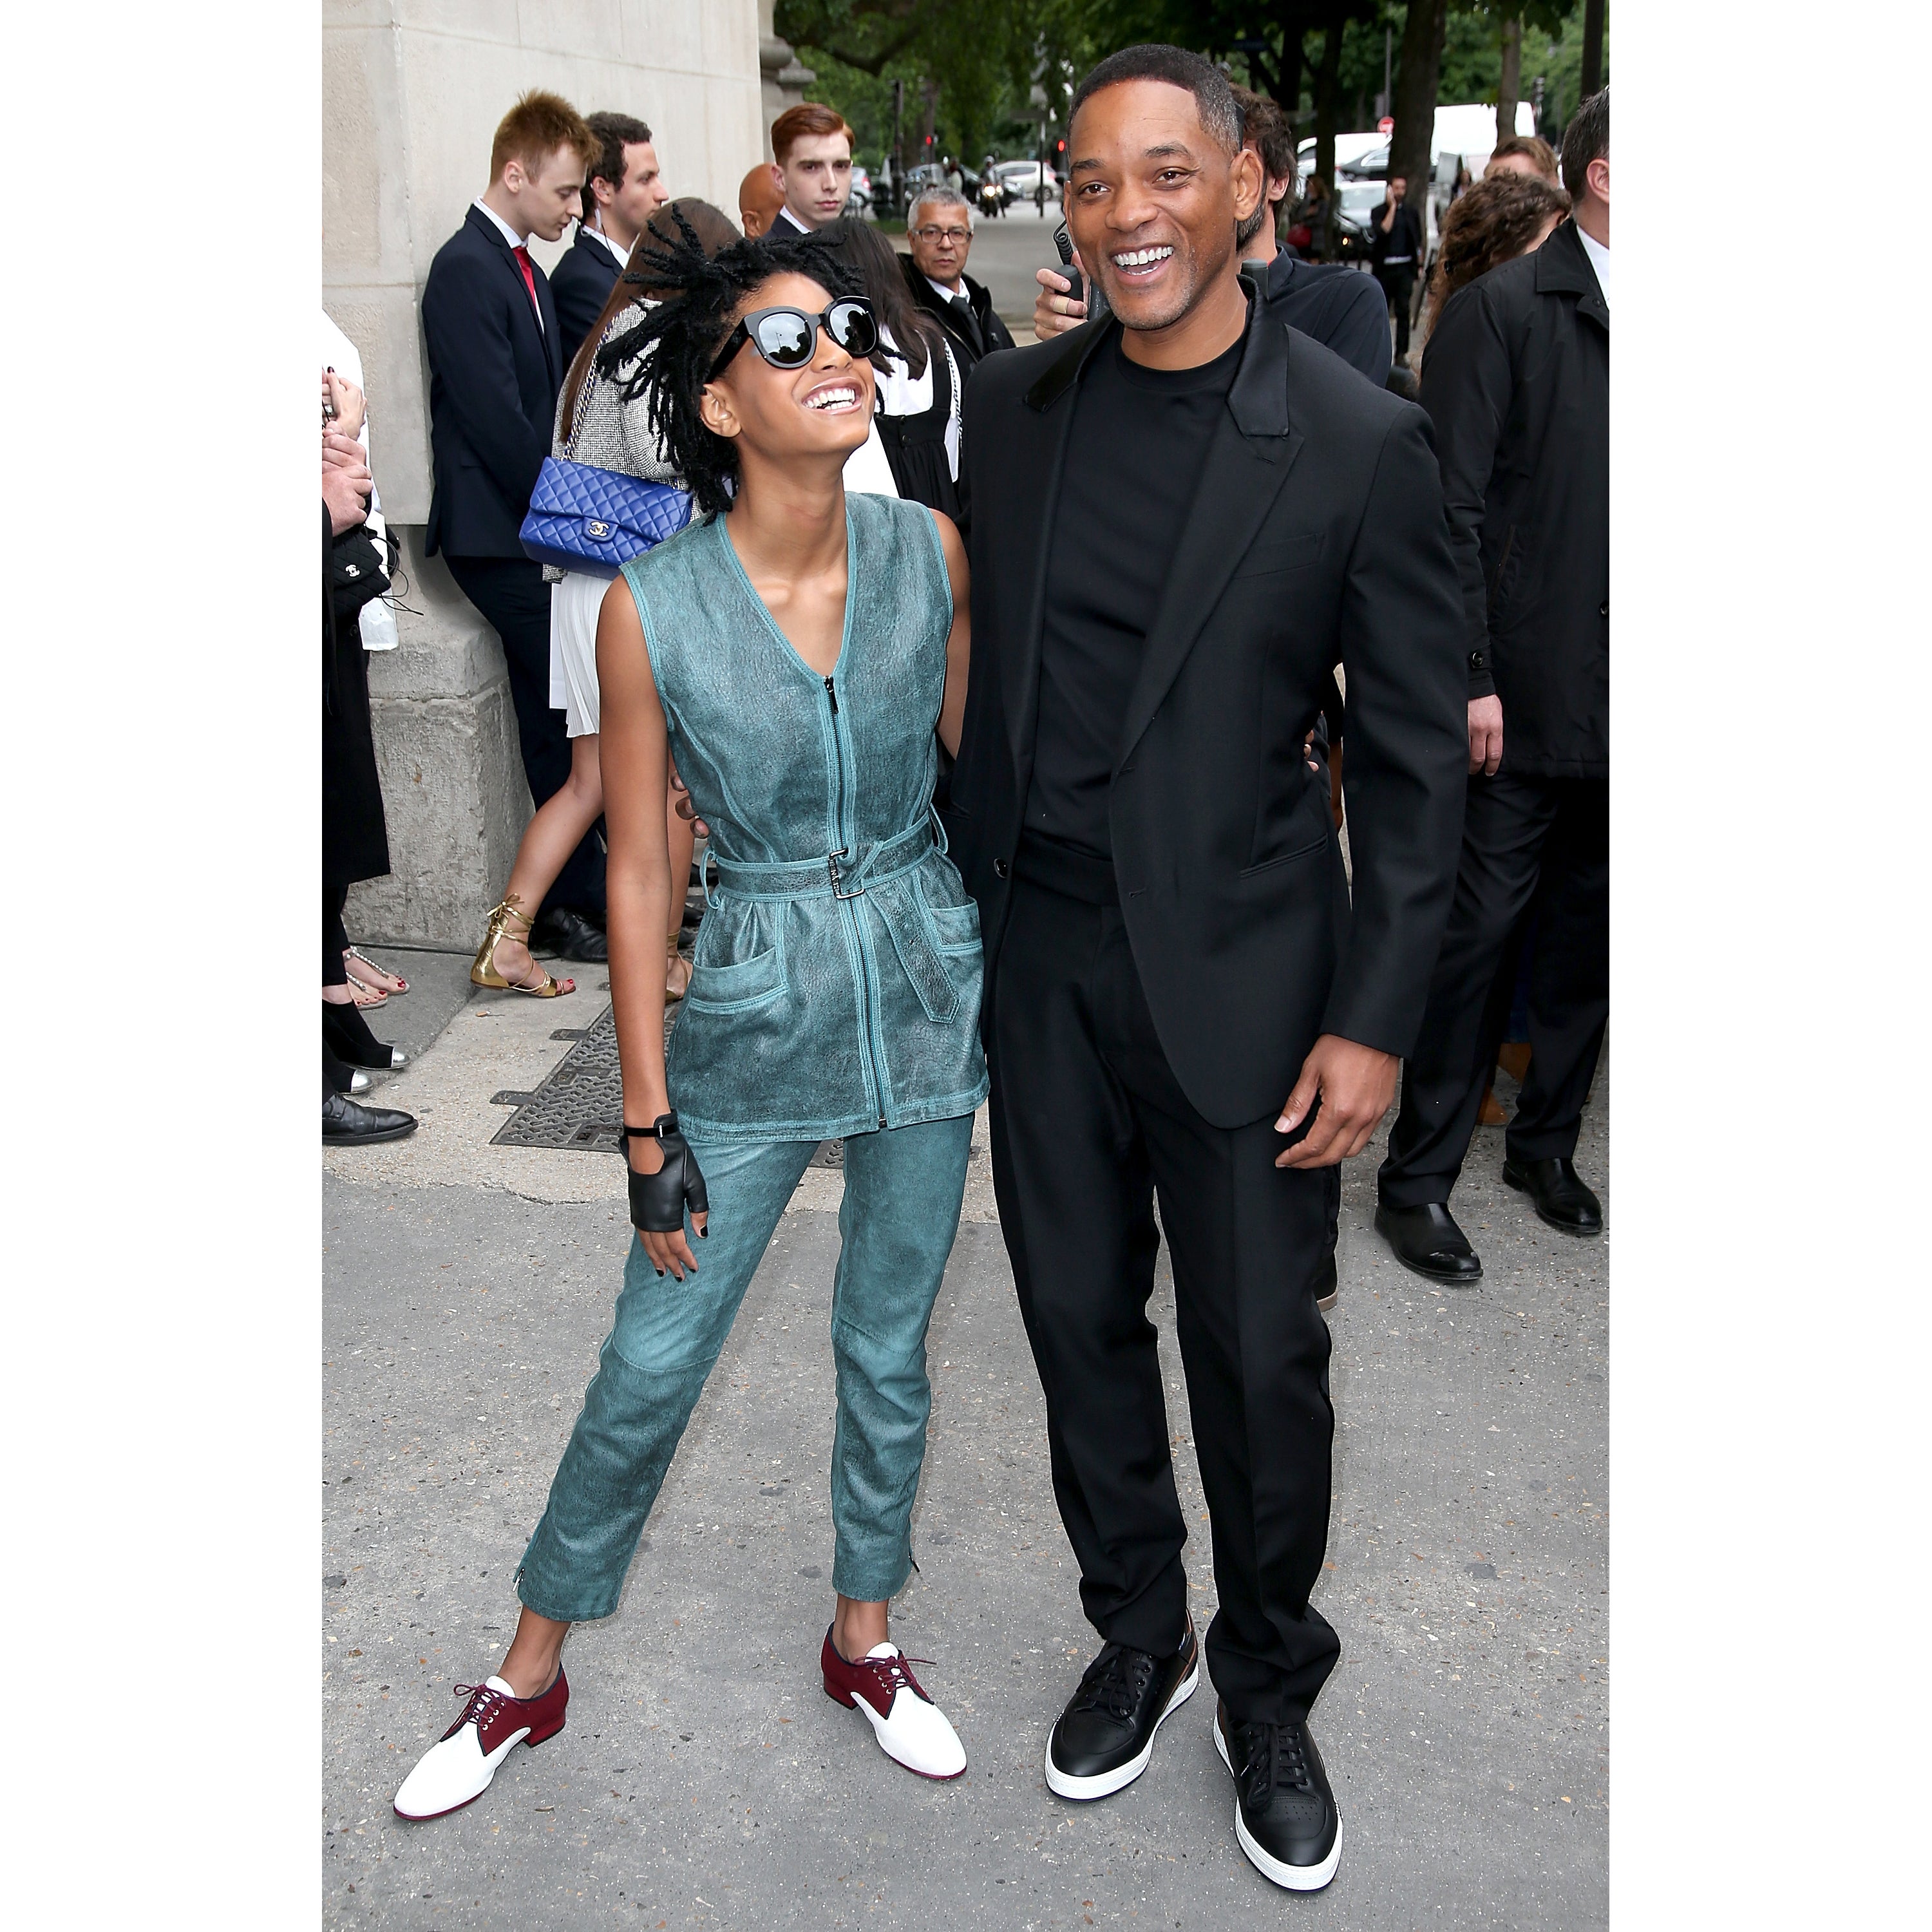 Will Smith, Paula Patton, Jessie T. Usher and More!
